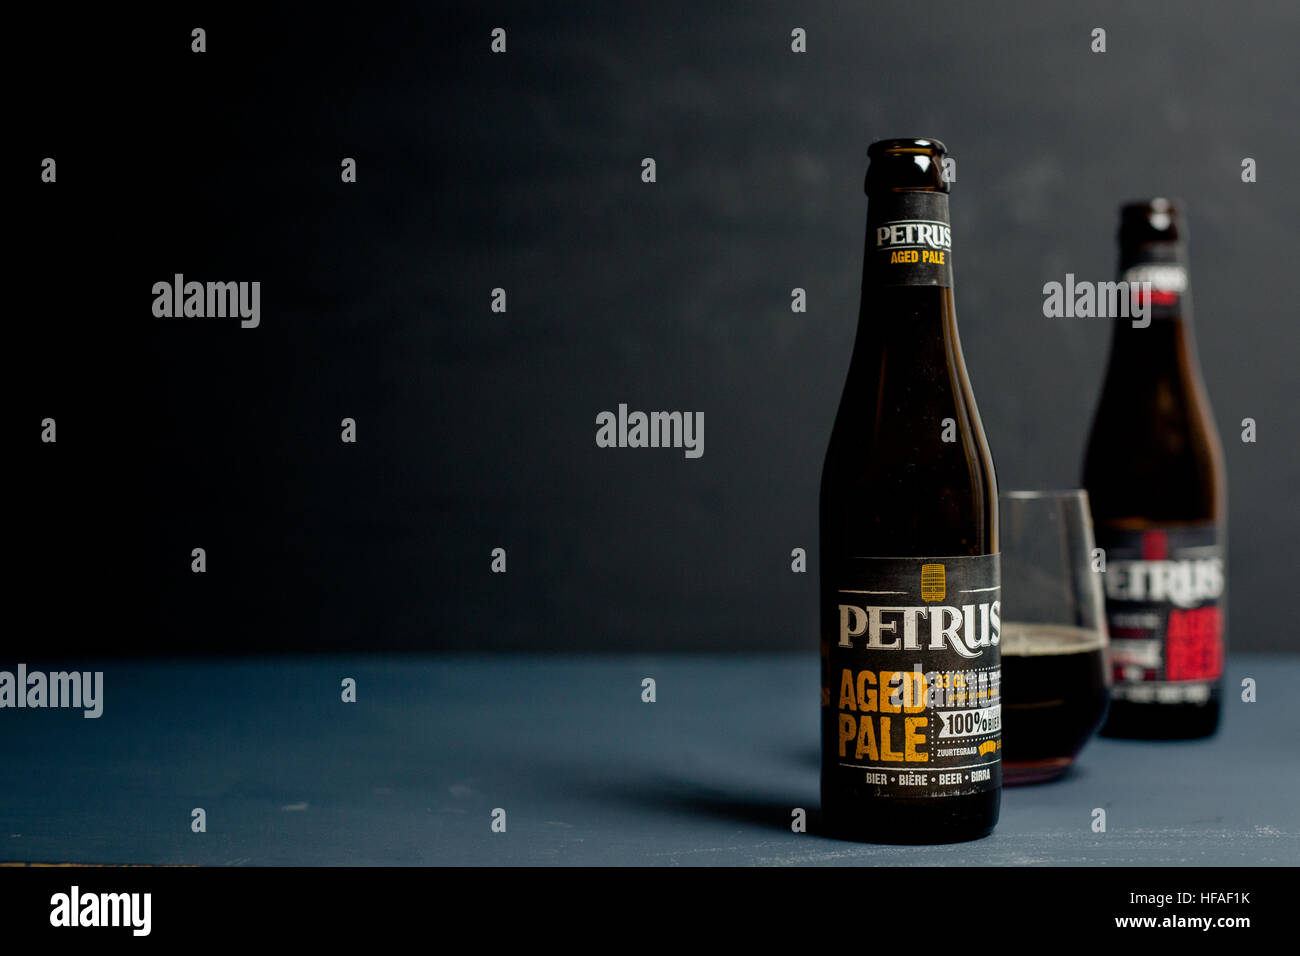 petrus aged red & aged pale bottles with beer in glass against a grey background Stock Photo